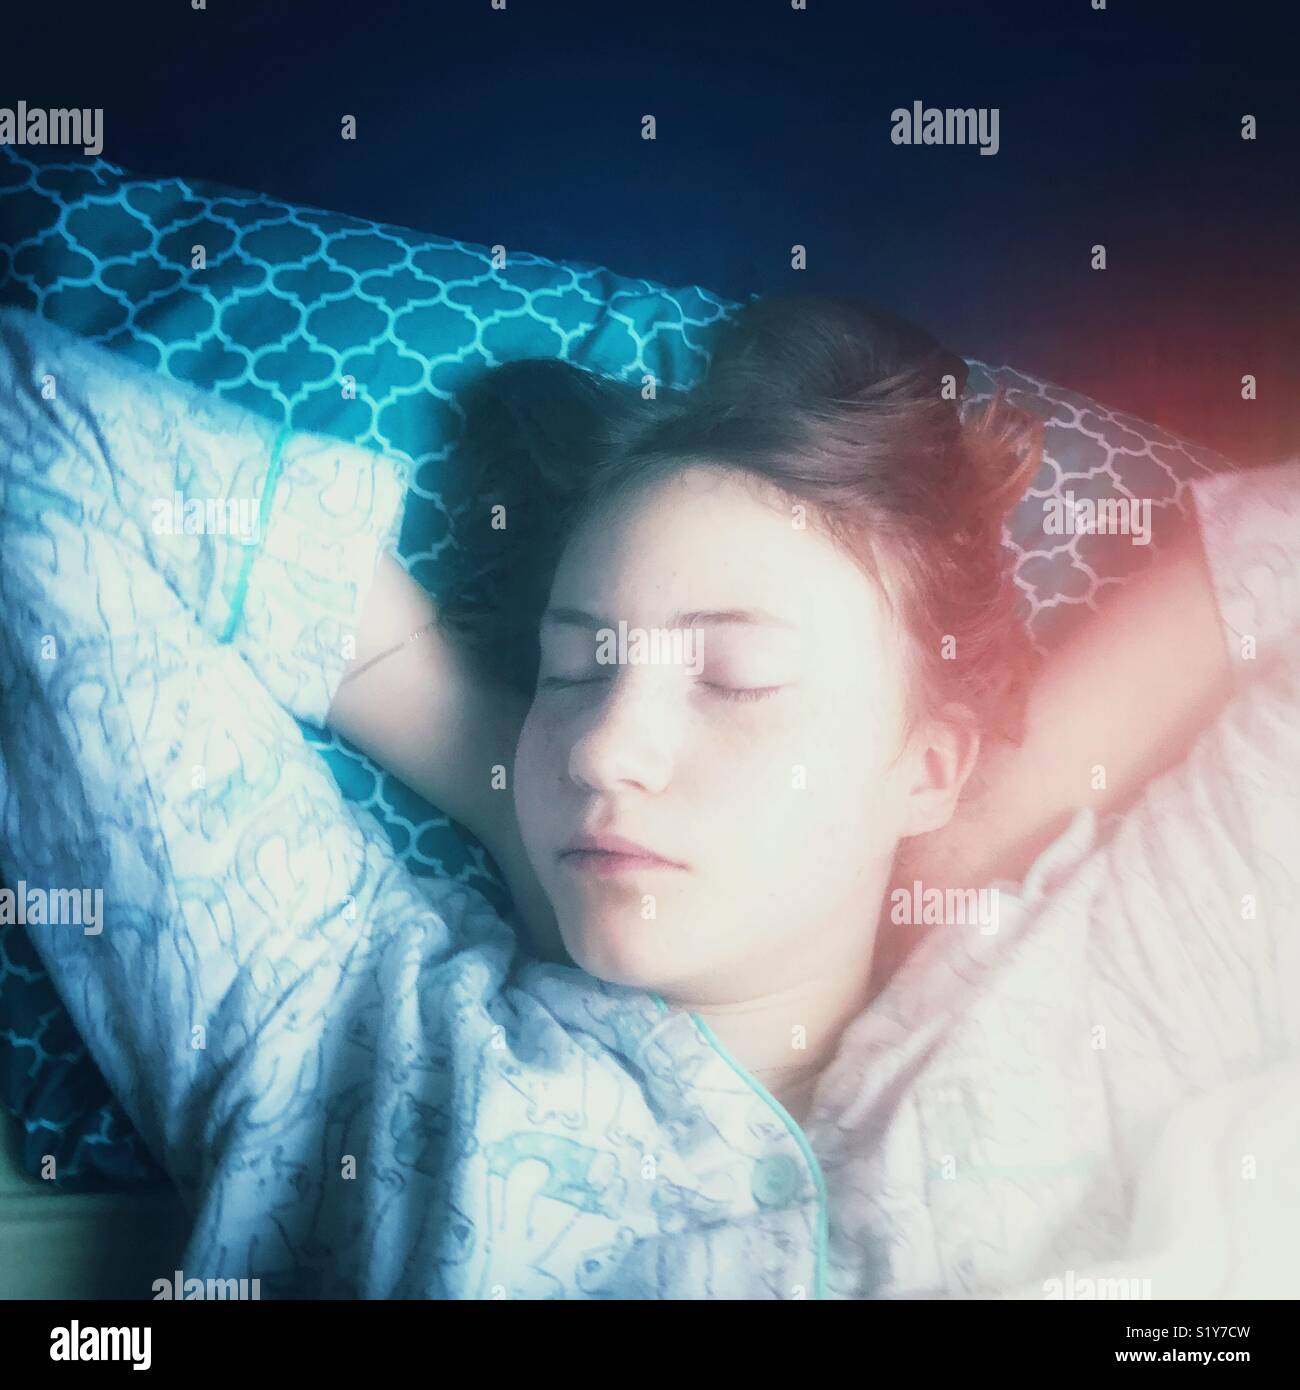 Sleeping adolescent girl with cool, dreamy lighting Stock Photo